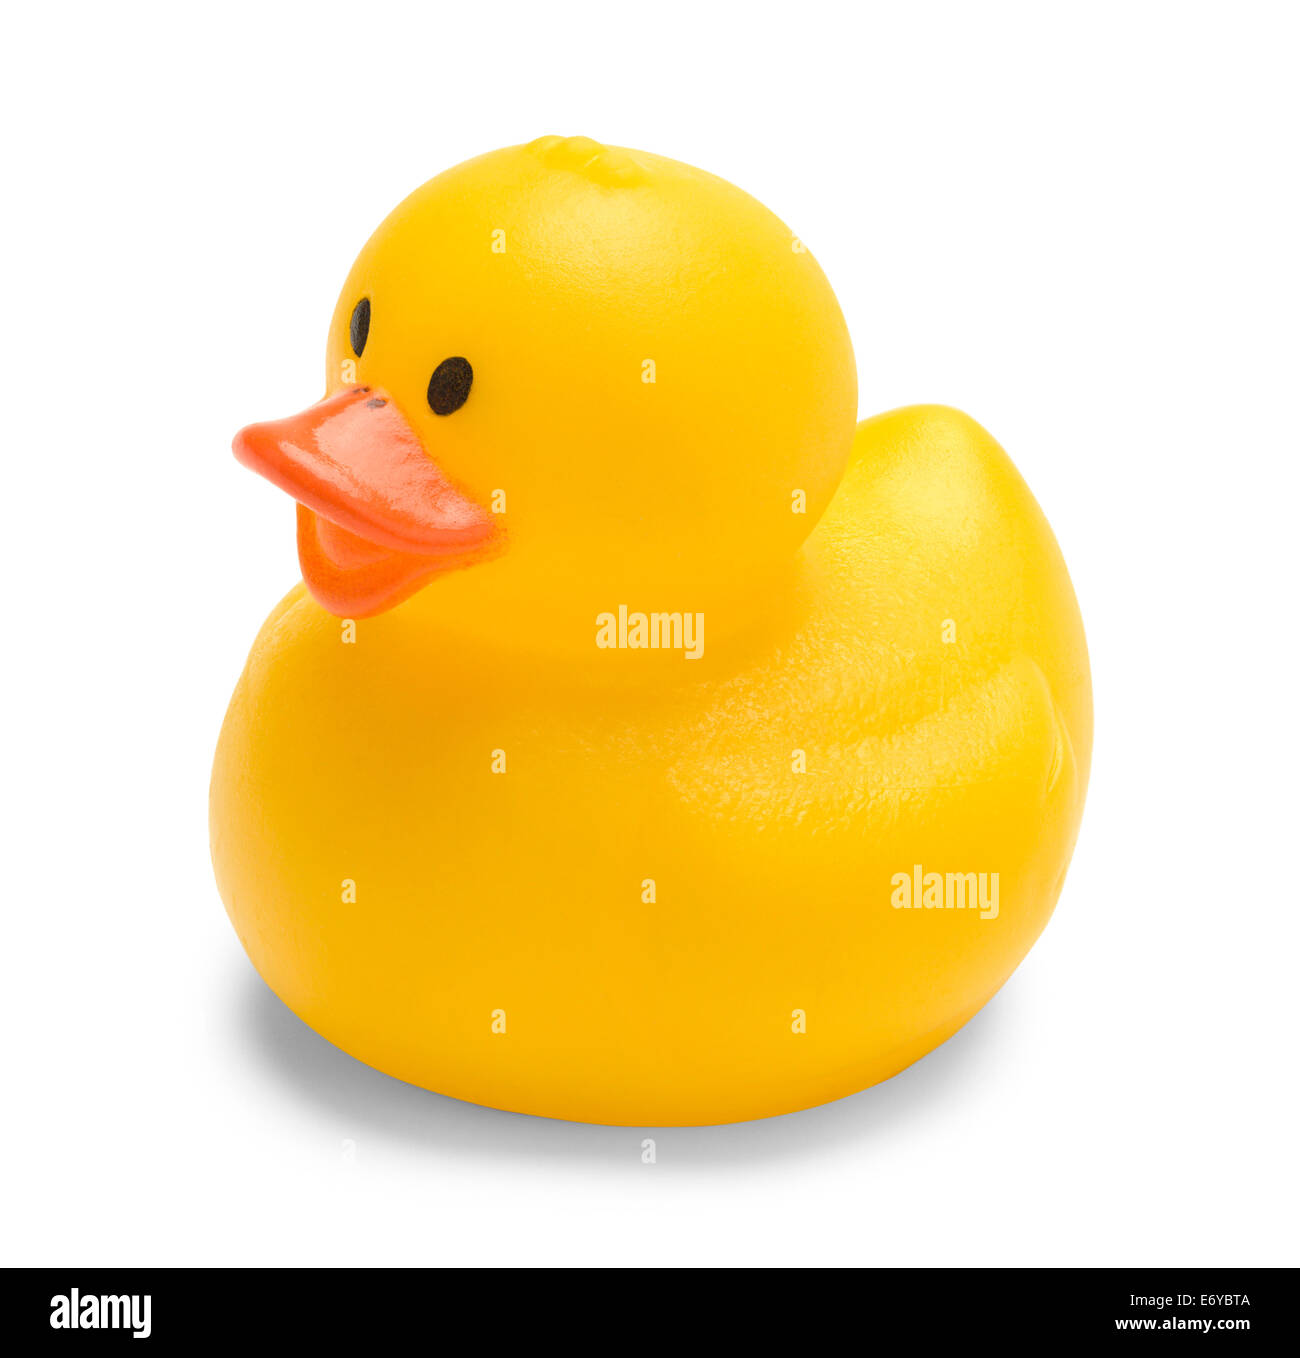 Small Yellow Toy Rubber Duck Isolated on White Background. Stock Photo